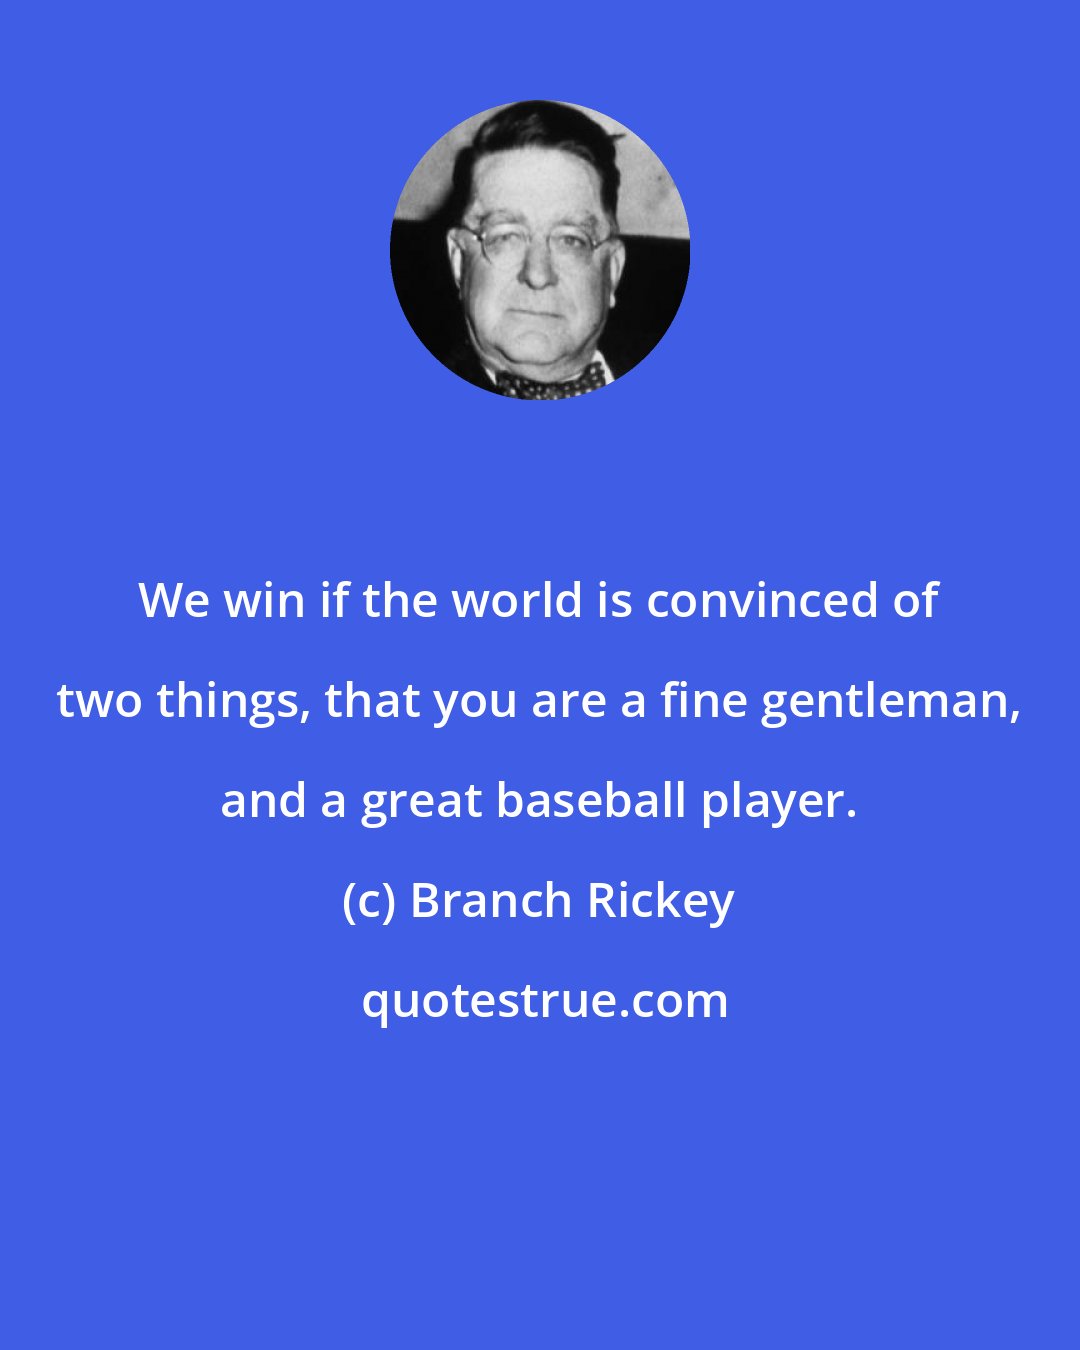 Branch Rickey: We win if the world is convinced of two things, that you are a fine gentleman, and a great baseball player.